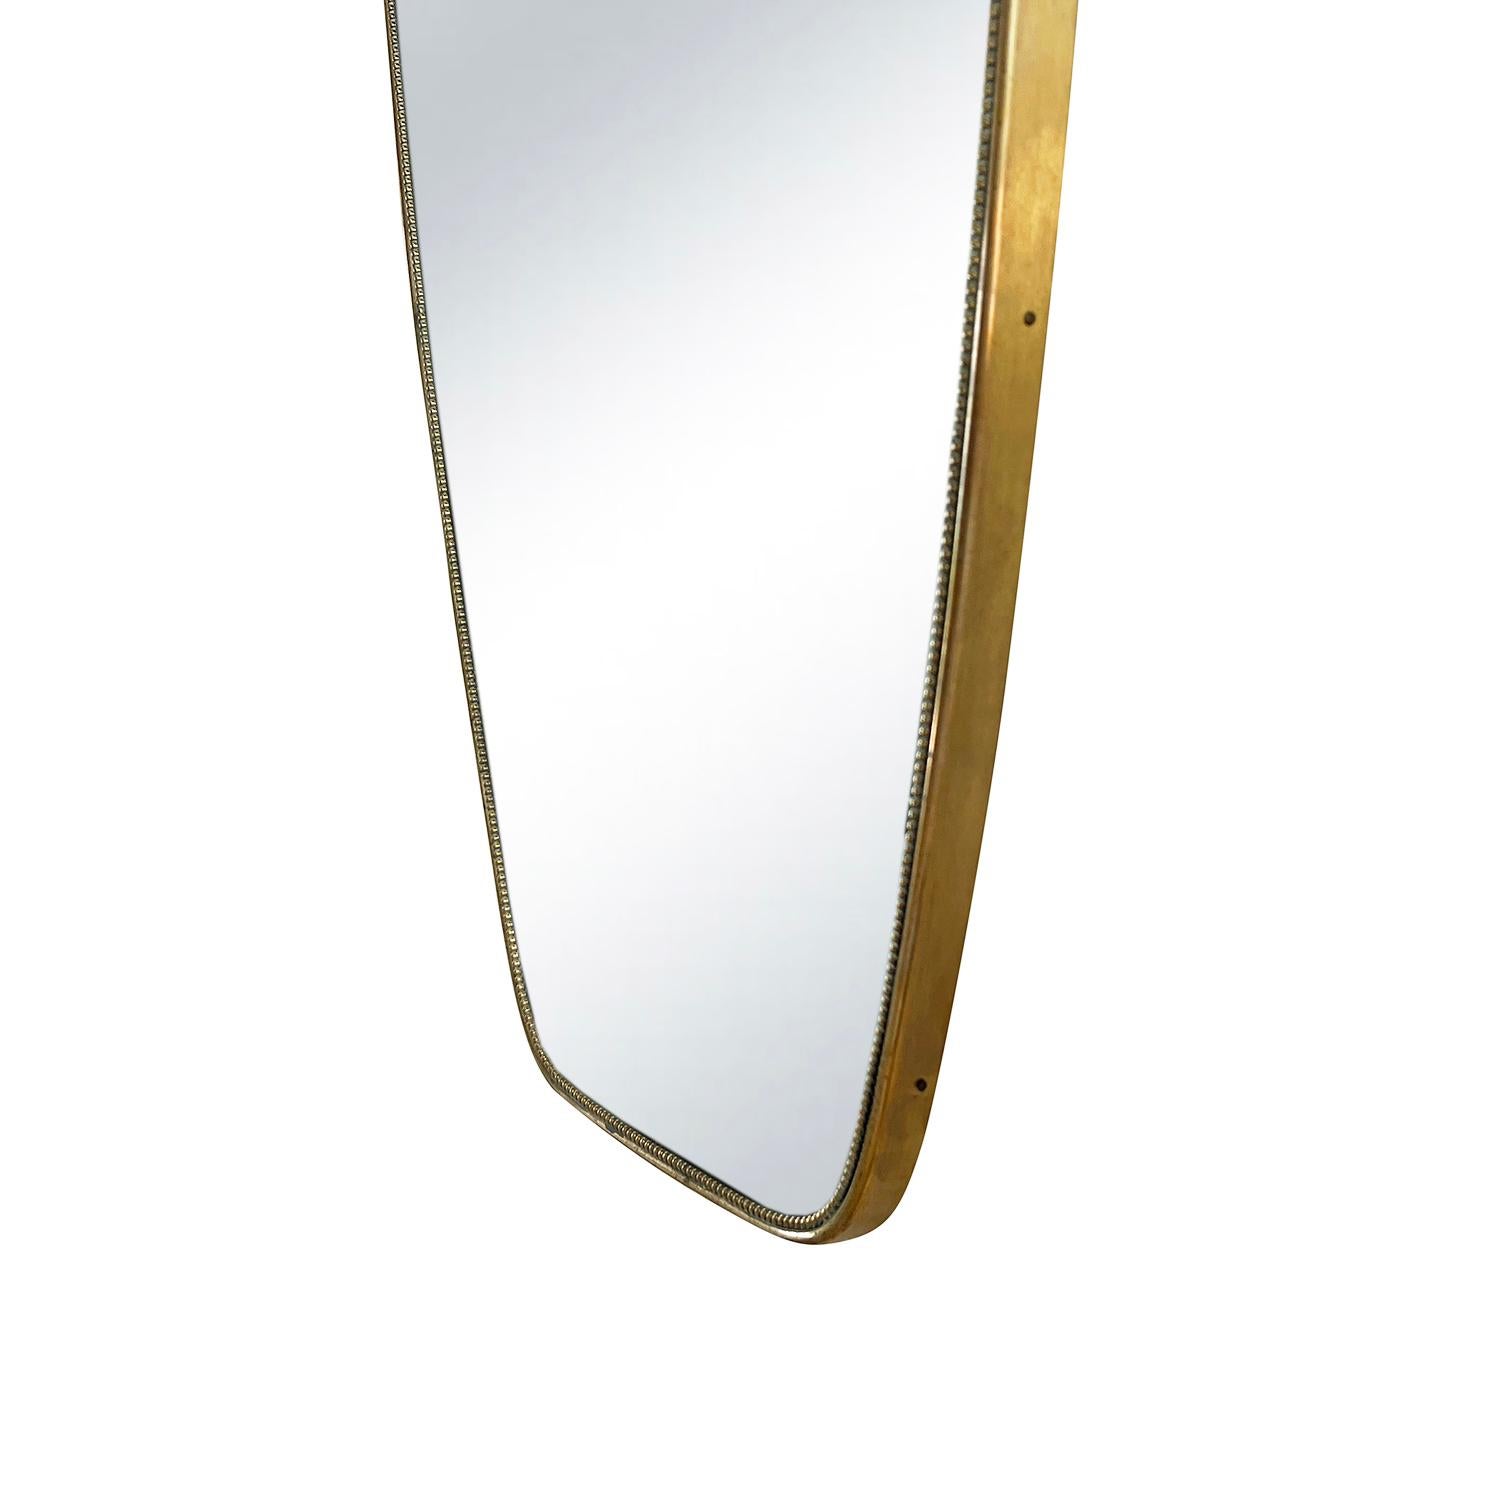 Polished 20th Century Italian Modernist Vintage Mid-Century Brass Wall Glass Mirror For Sale